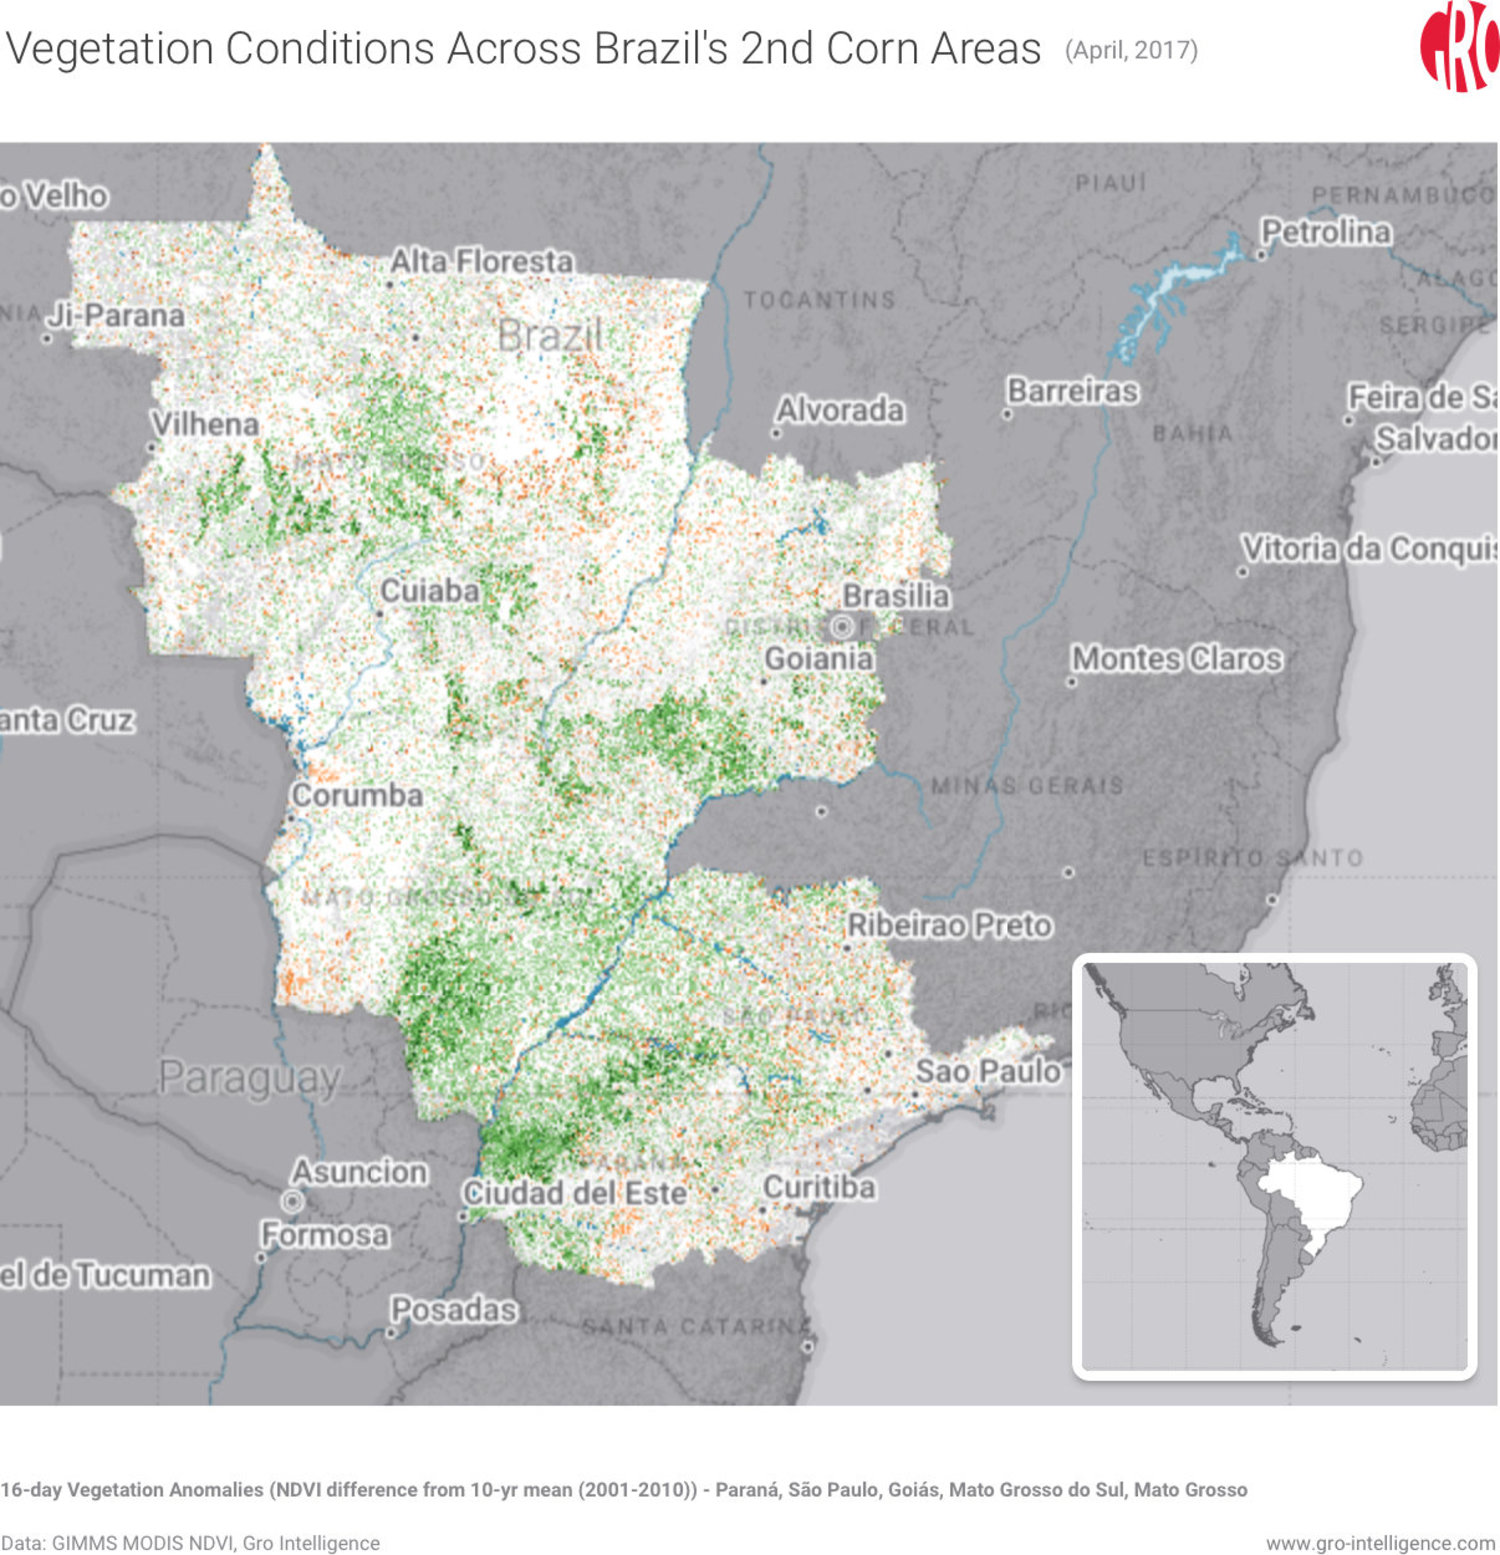 Vegetation Conditions in Brazil